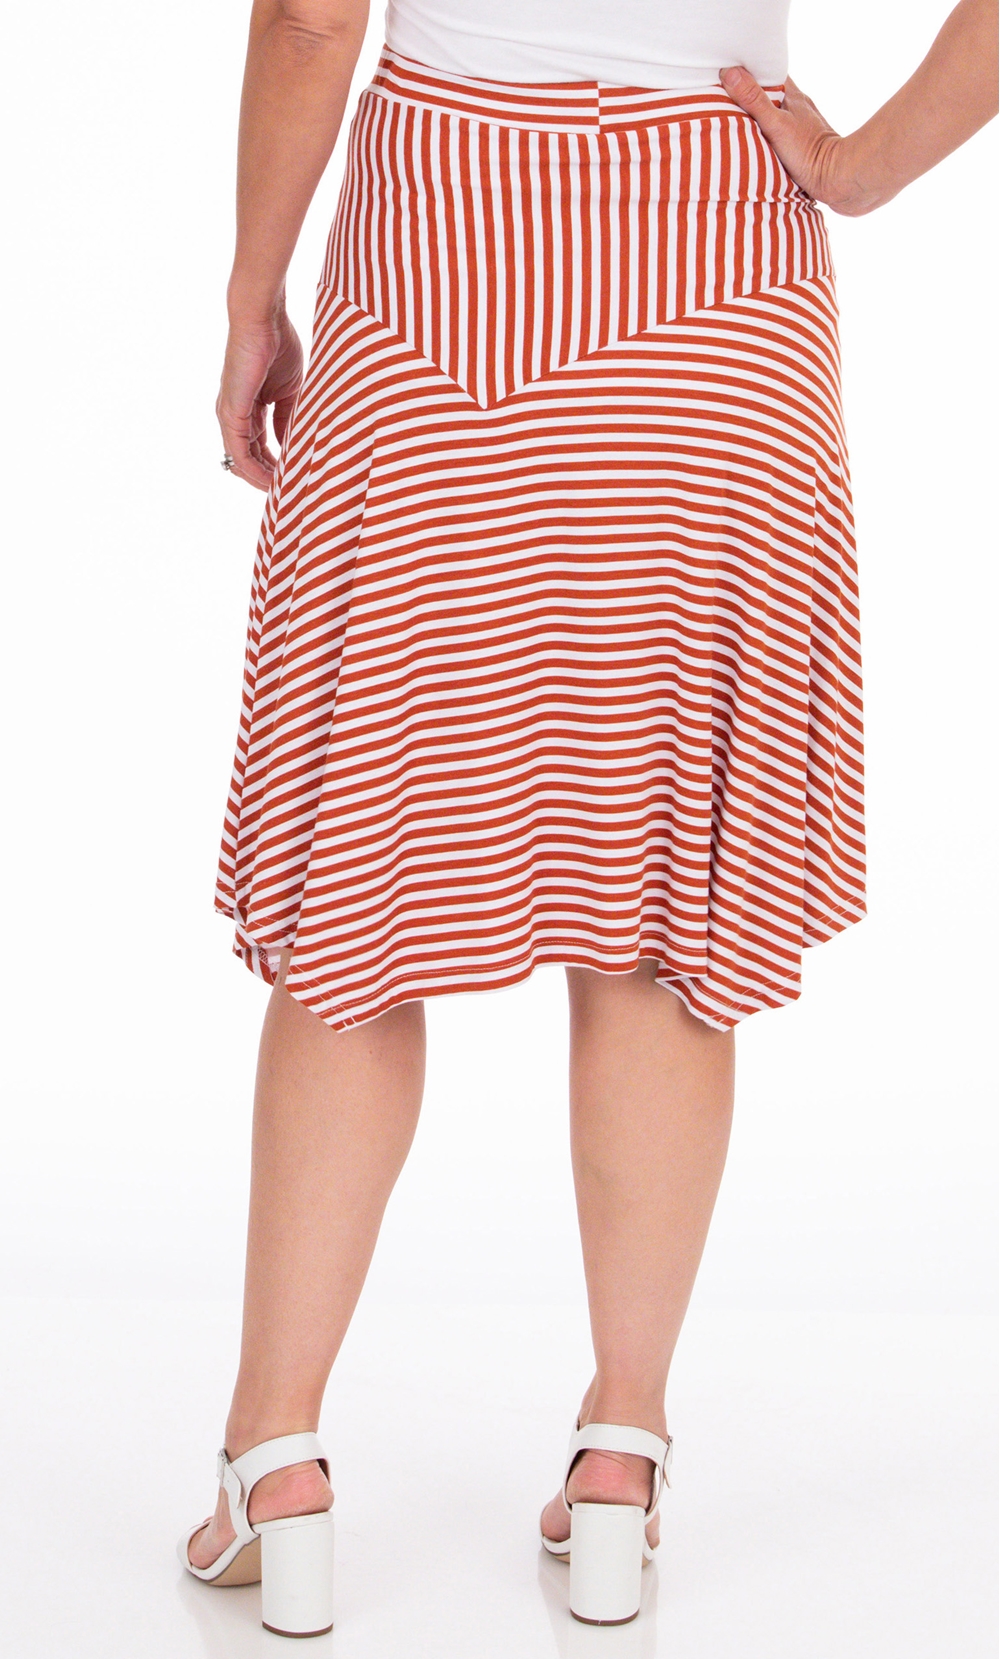 Pull On Striped Jersey Skirt